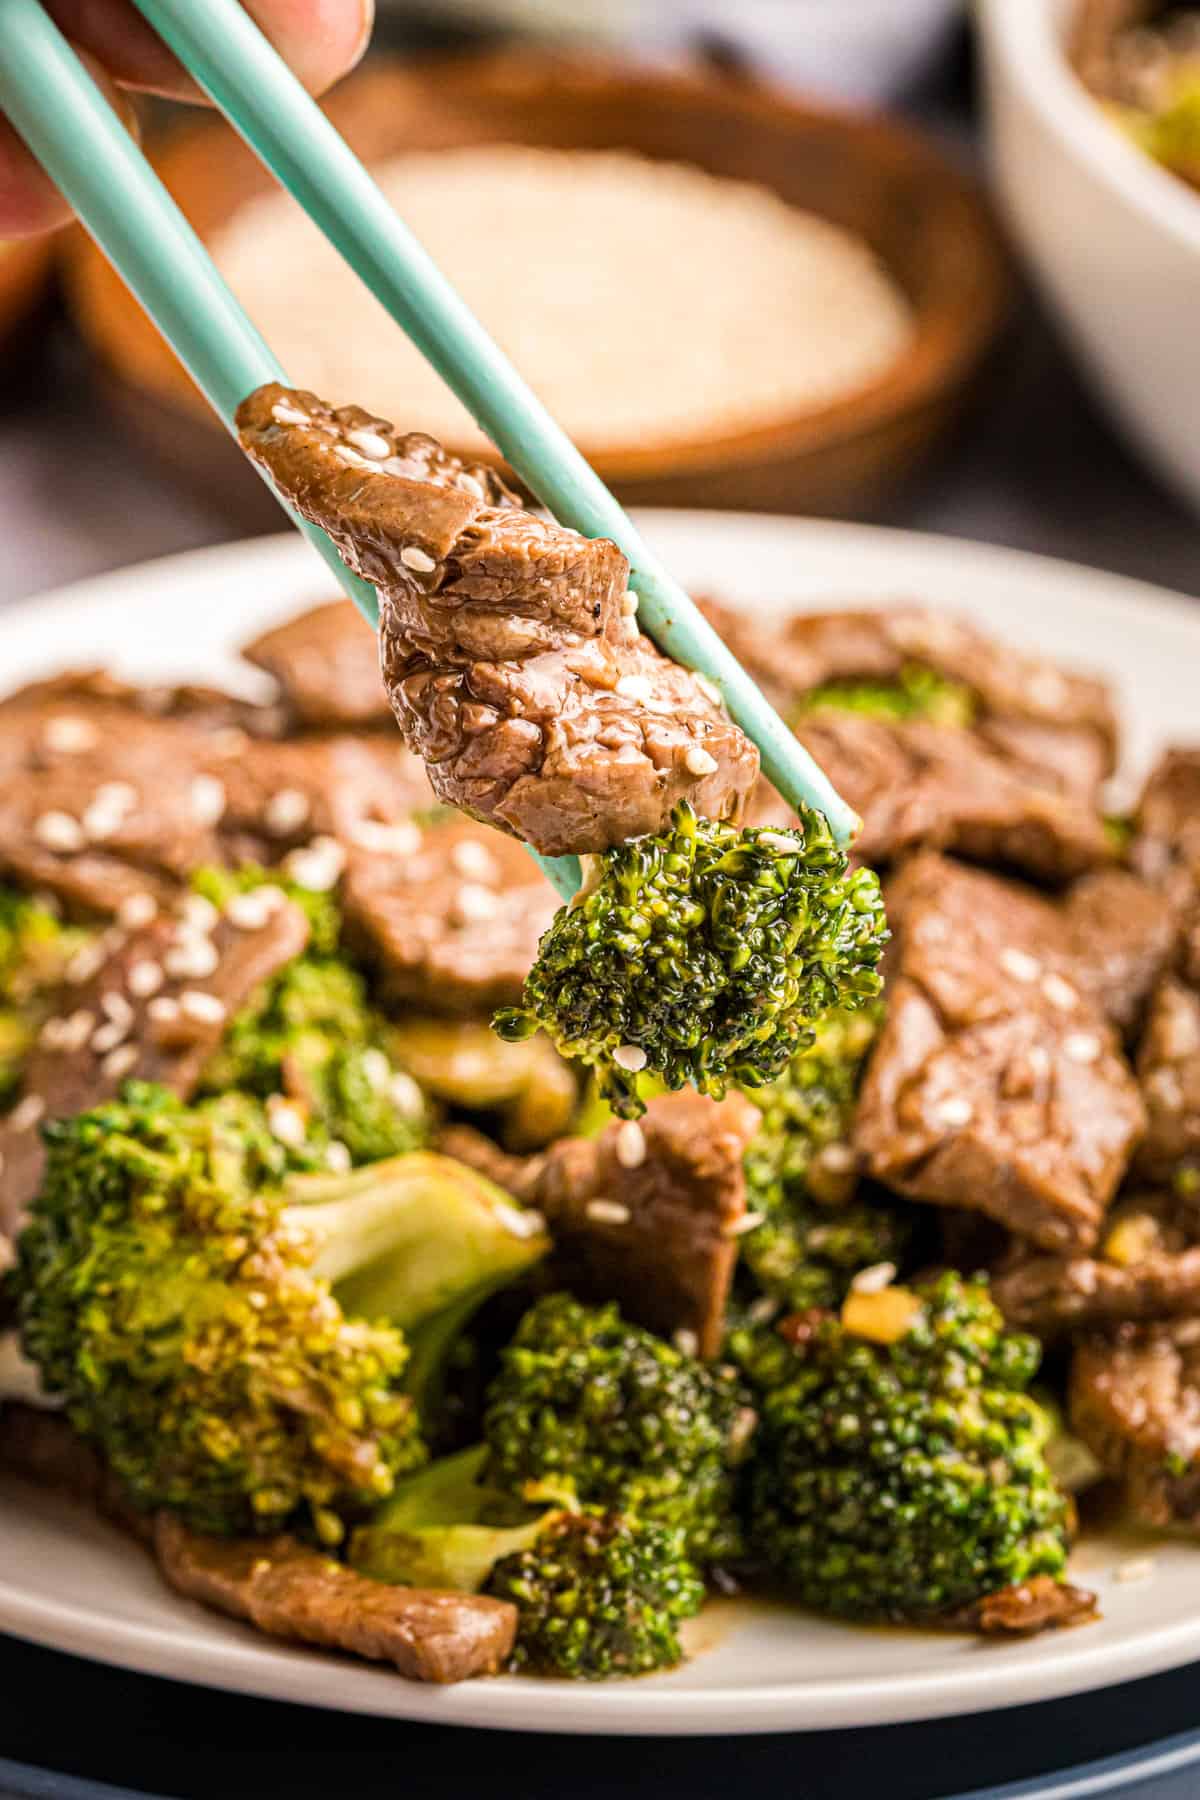 Blackstone Beef & Broccoli in shallow bowl using chopsticks to eat with